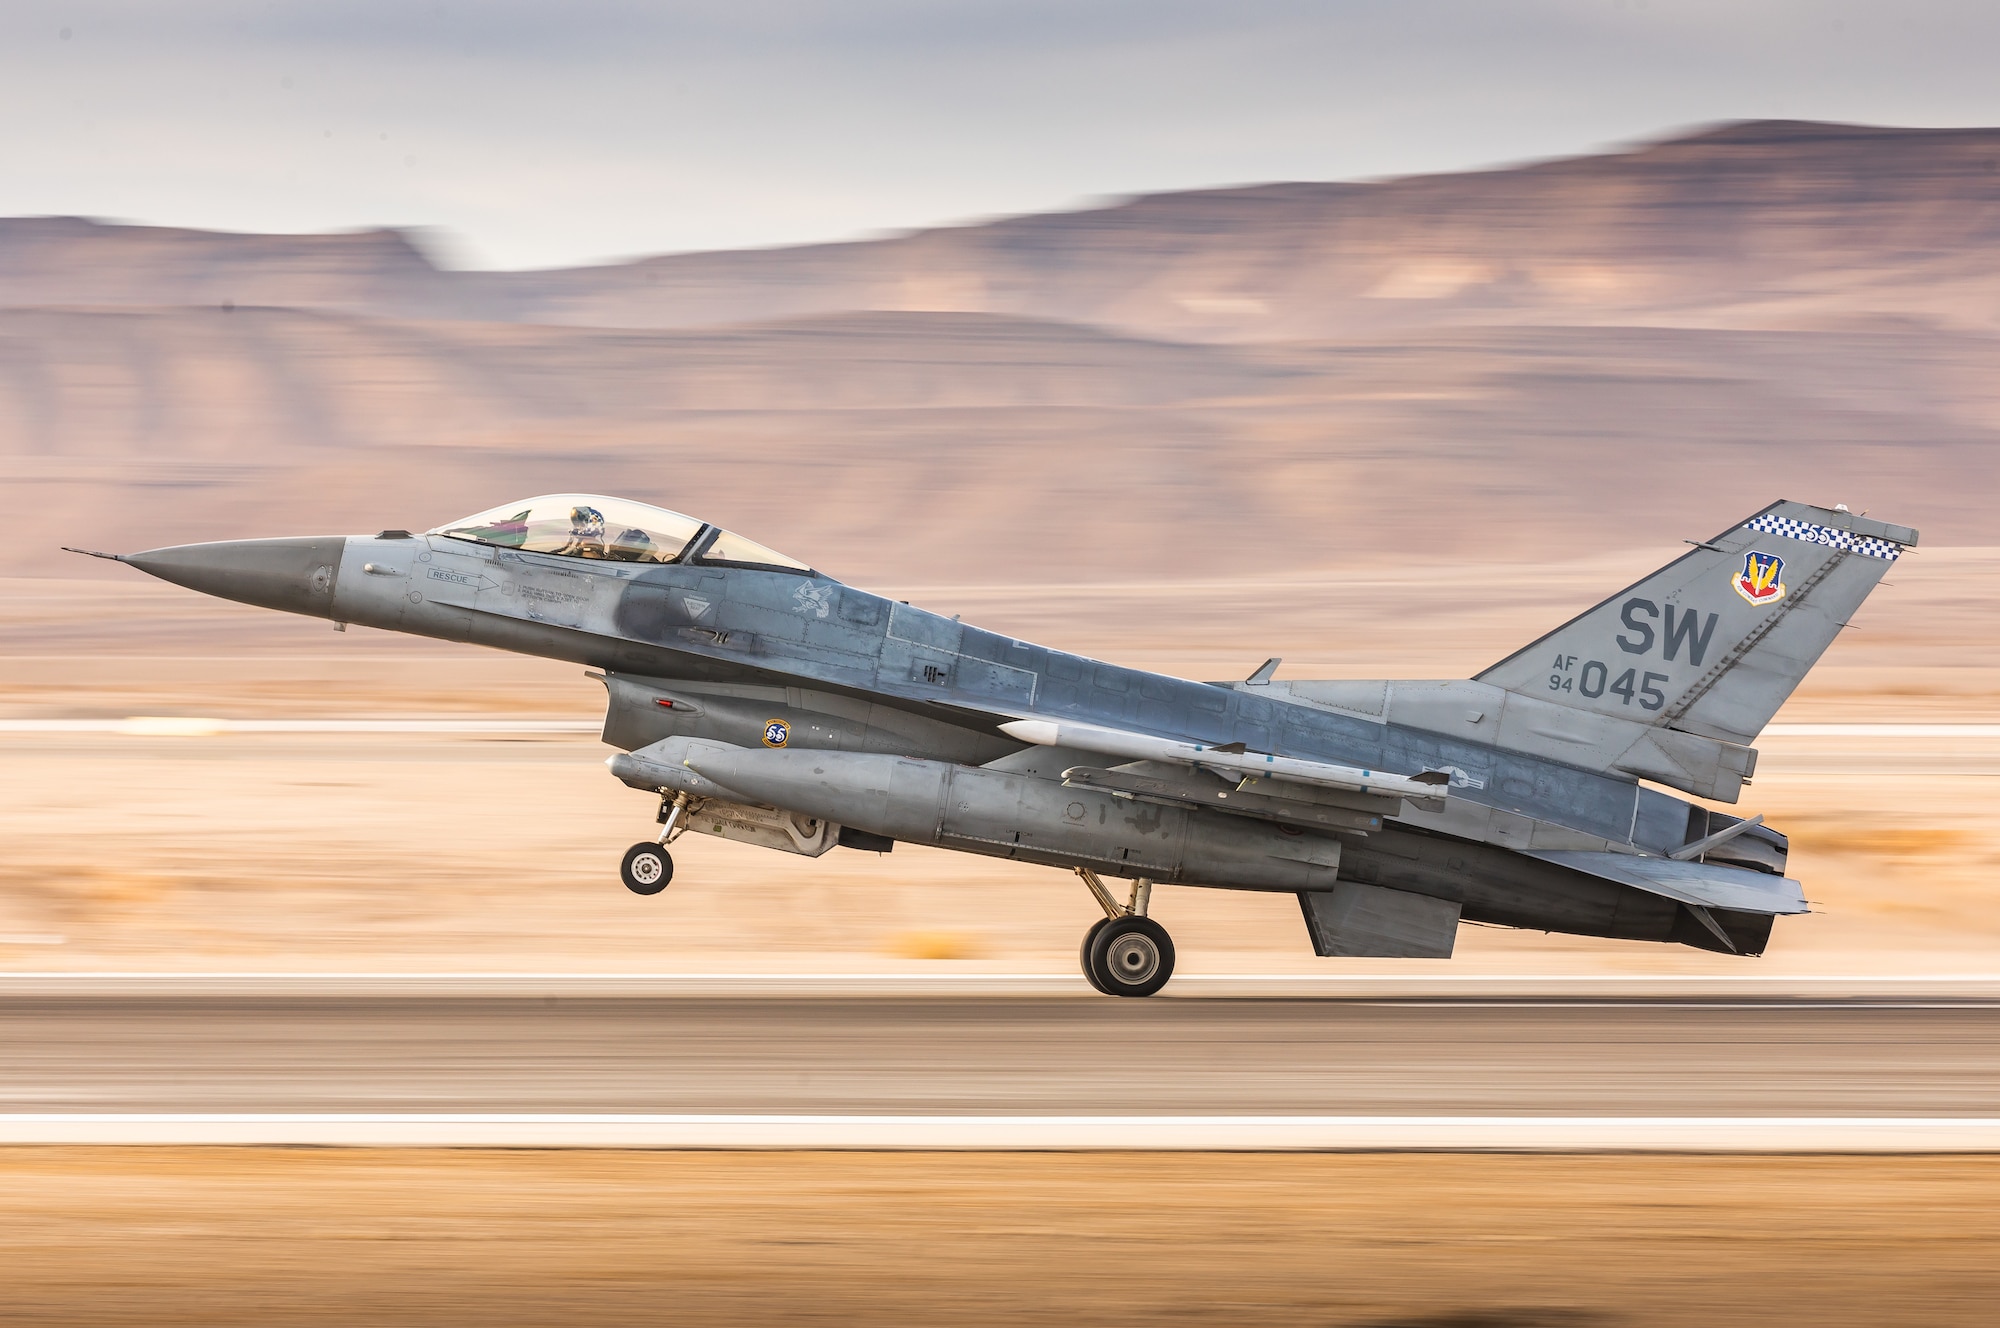 A U.S. Air Force pilot from the 55th Expeditionary Fighter Squadron taxis during Desert Falcon in Israel, Jan. 16, 2022. During Desert Falcon, Israeli and U.S aircrews flew wing-to-wing and trained for various aerial scenarios and strikes. (Courtesy photo by the Israeli Air Force)